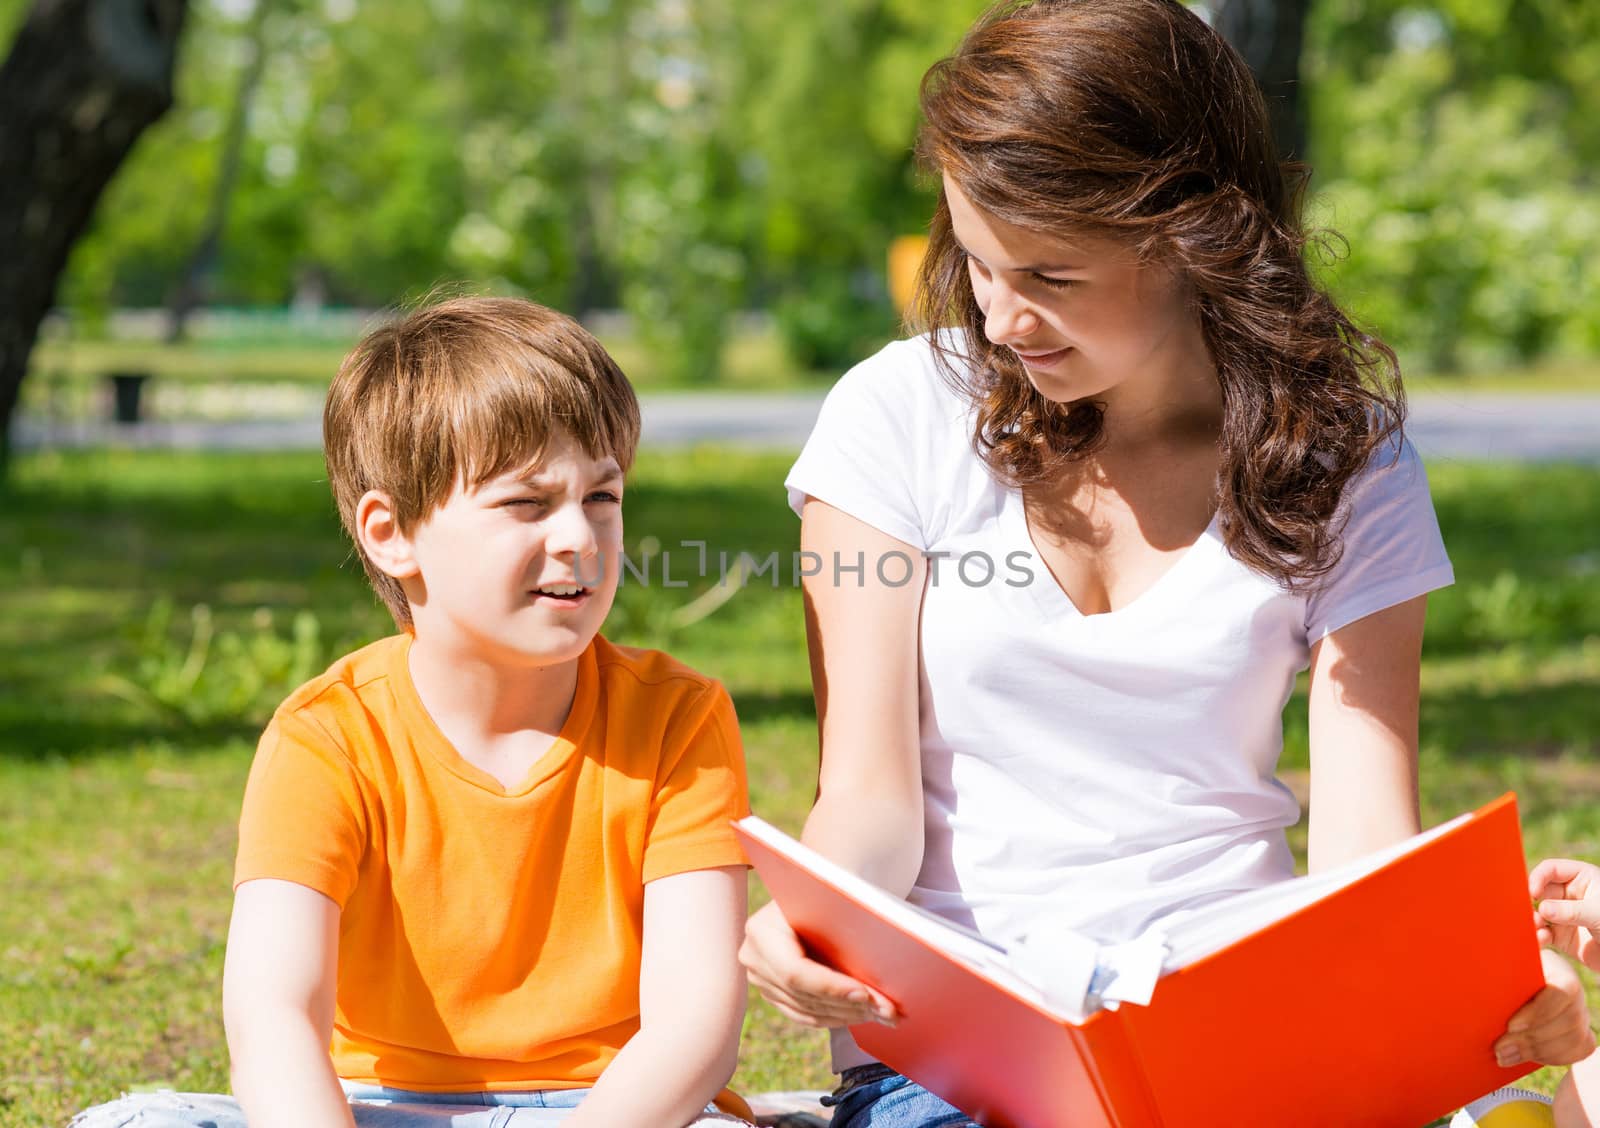 boy and a woman in a summer park reading a book together